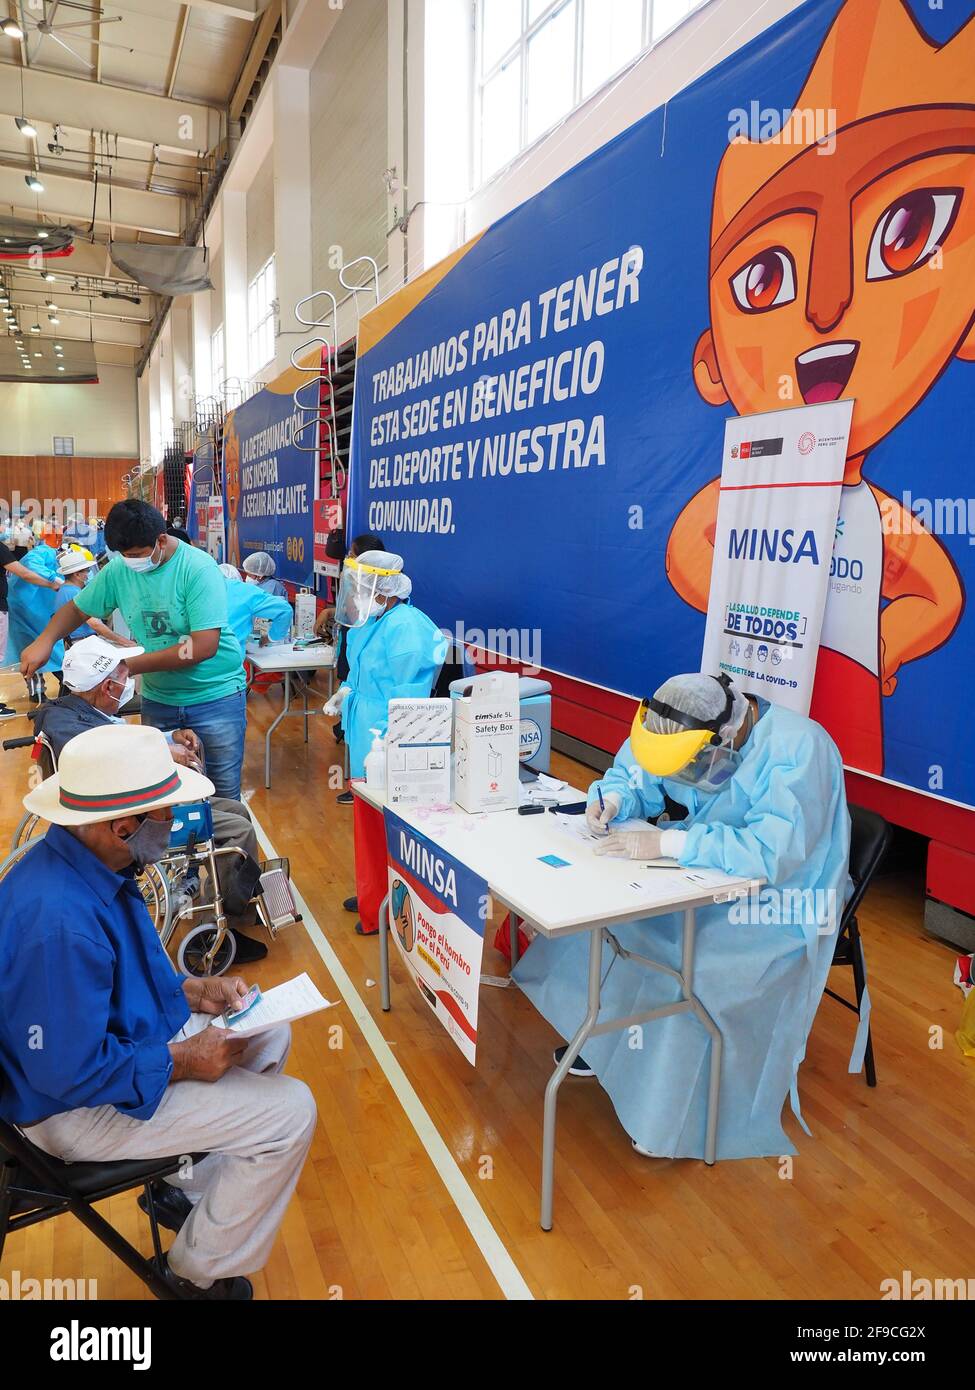 Elderly being inoculated with the Covid-19 vaccine in a sports center. The Peruvian Government enabled the sports venues of the Lima 2019 Pan American Games as vaccination centers. Stock Photo